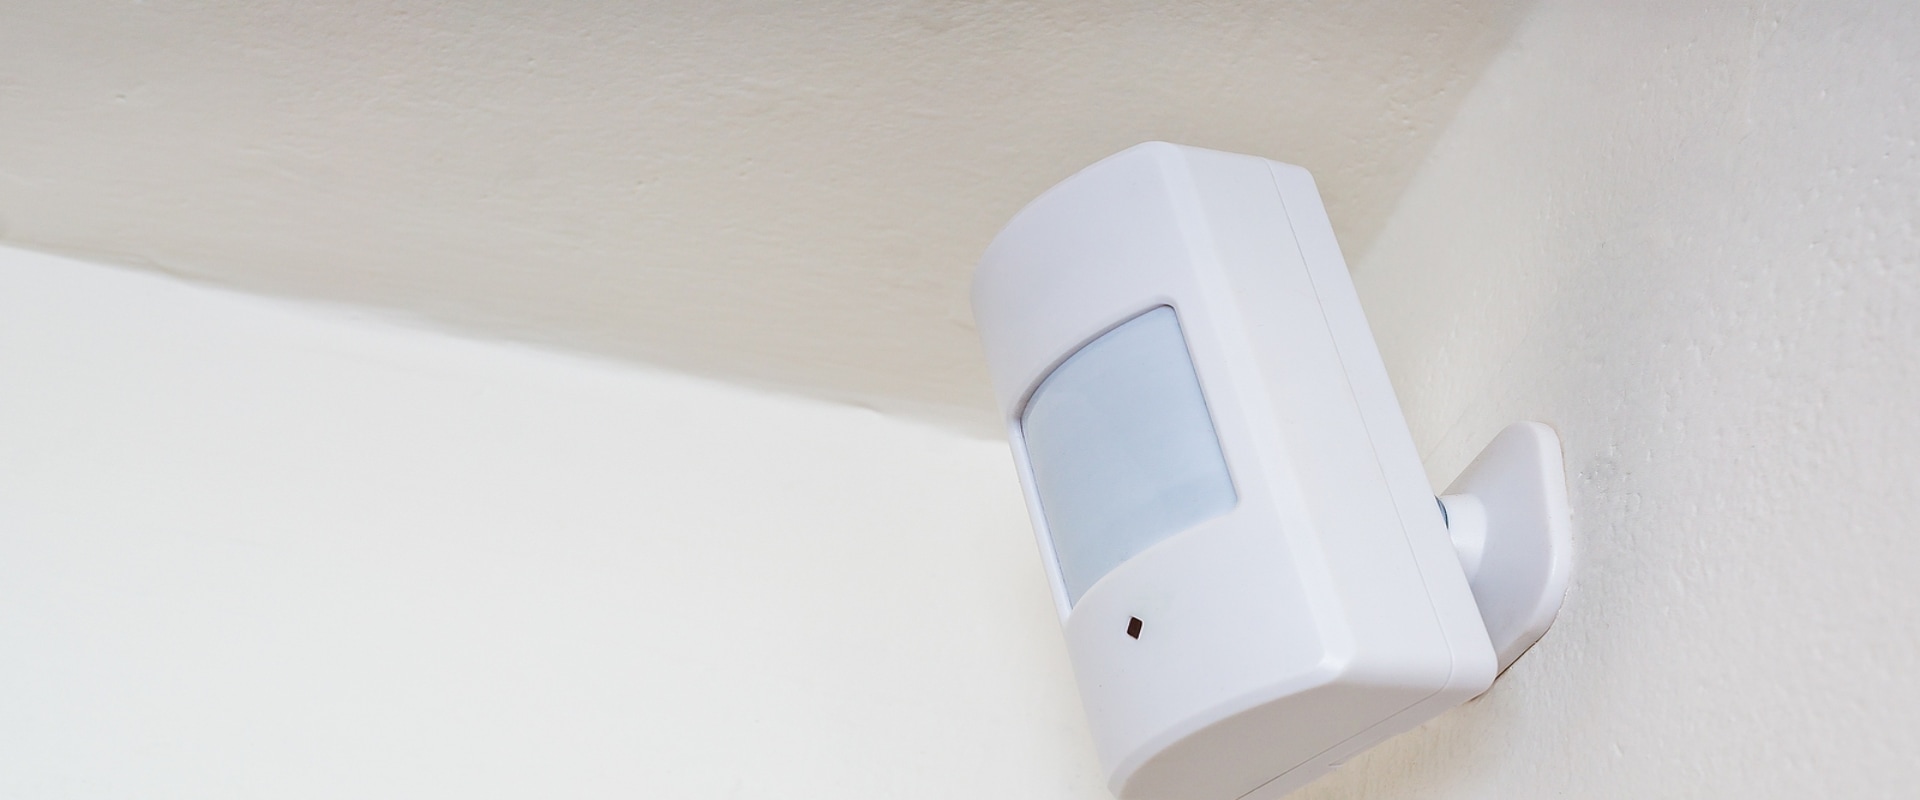 Real-Time Alerts for Motion Detection Around Your Property or Area